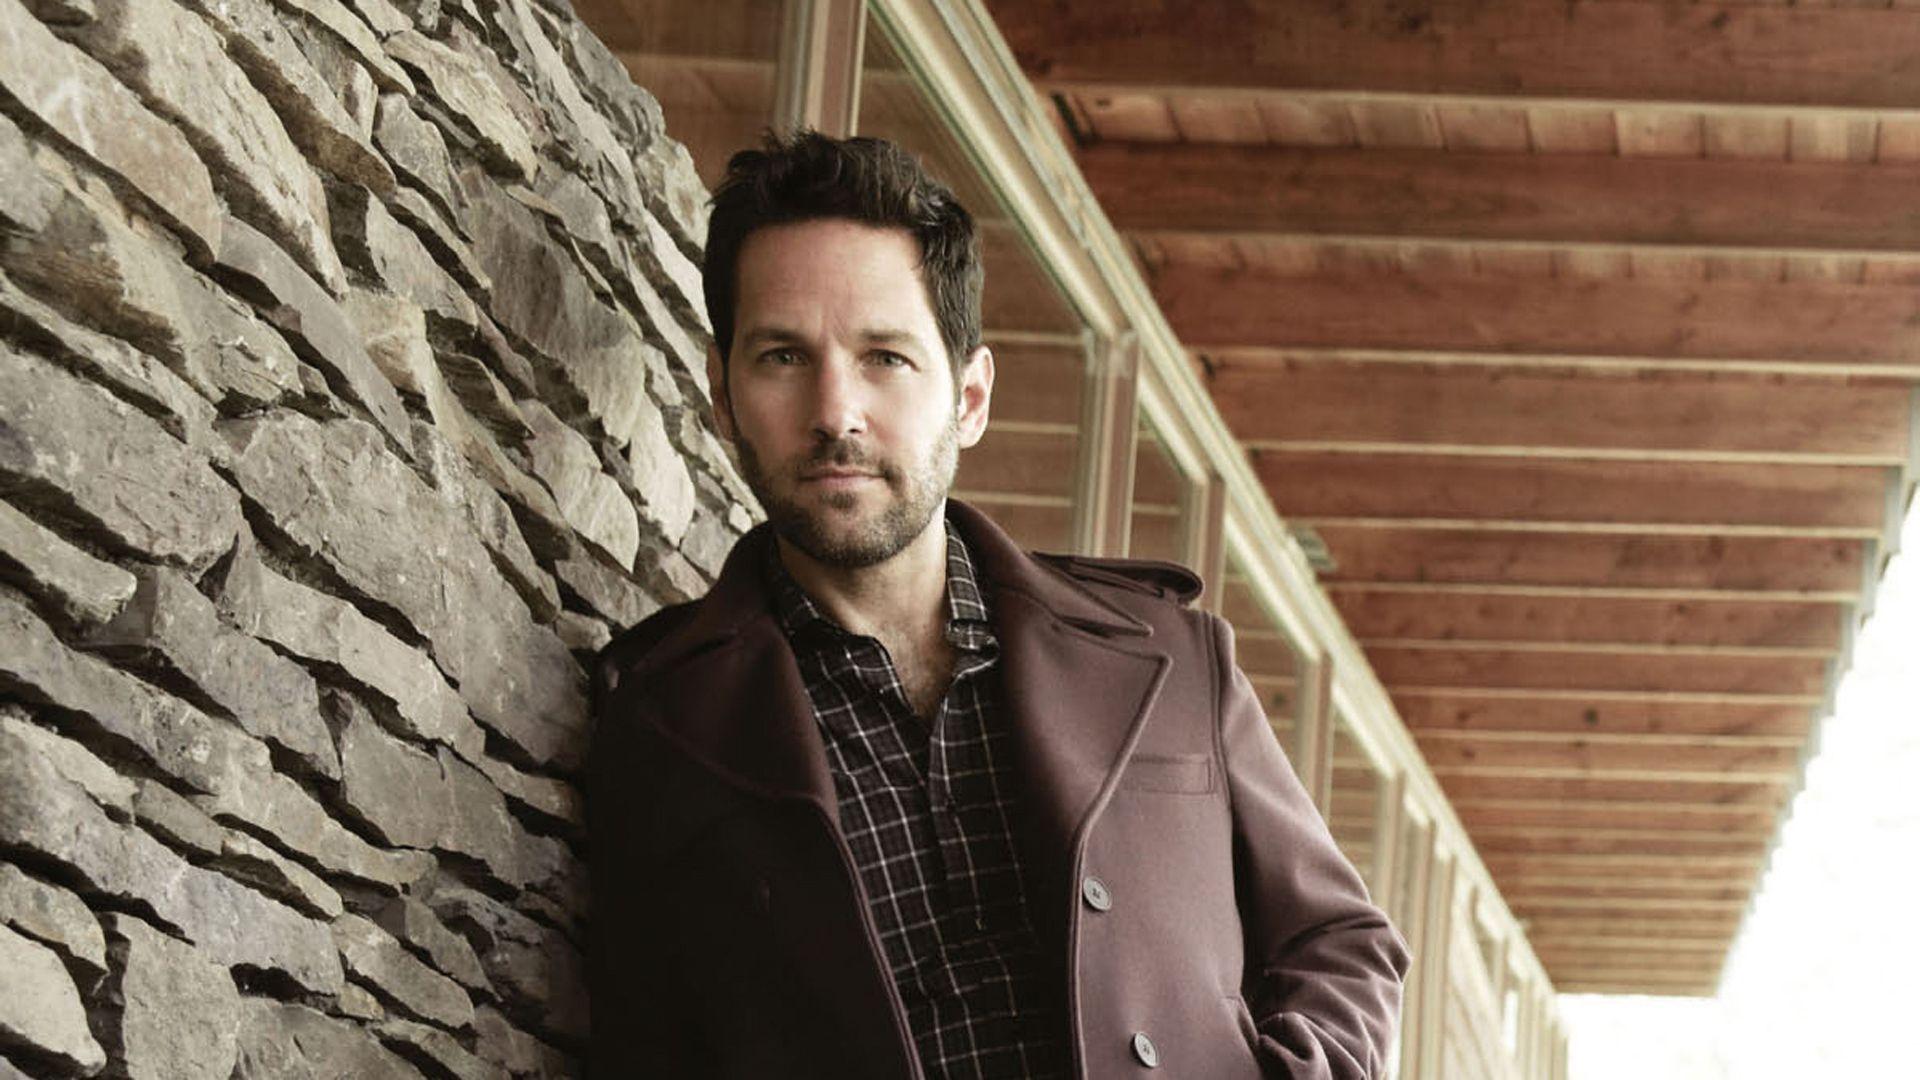 Paul Rudd Wallpaper Image Photo Picture Background